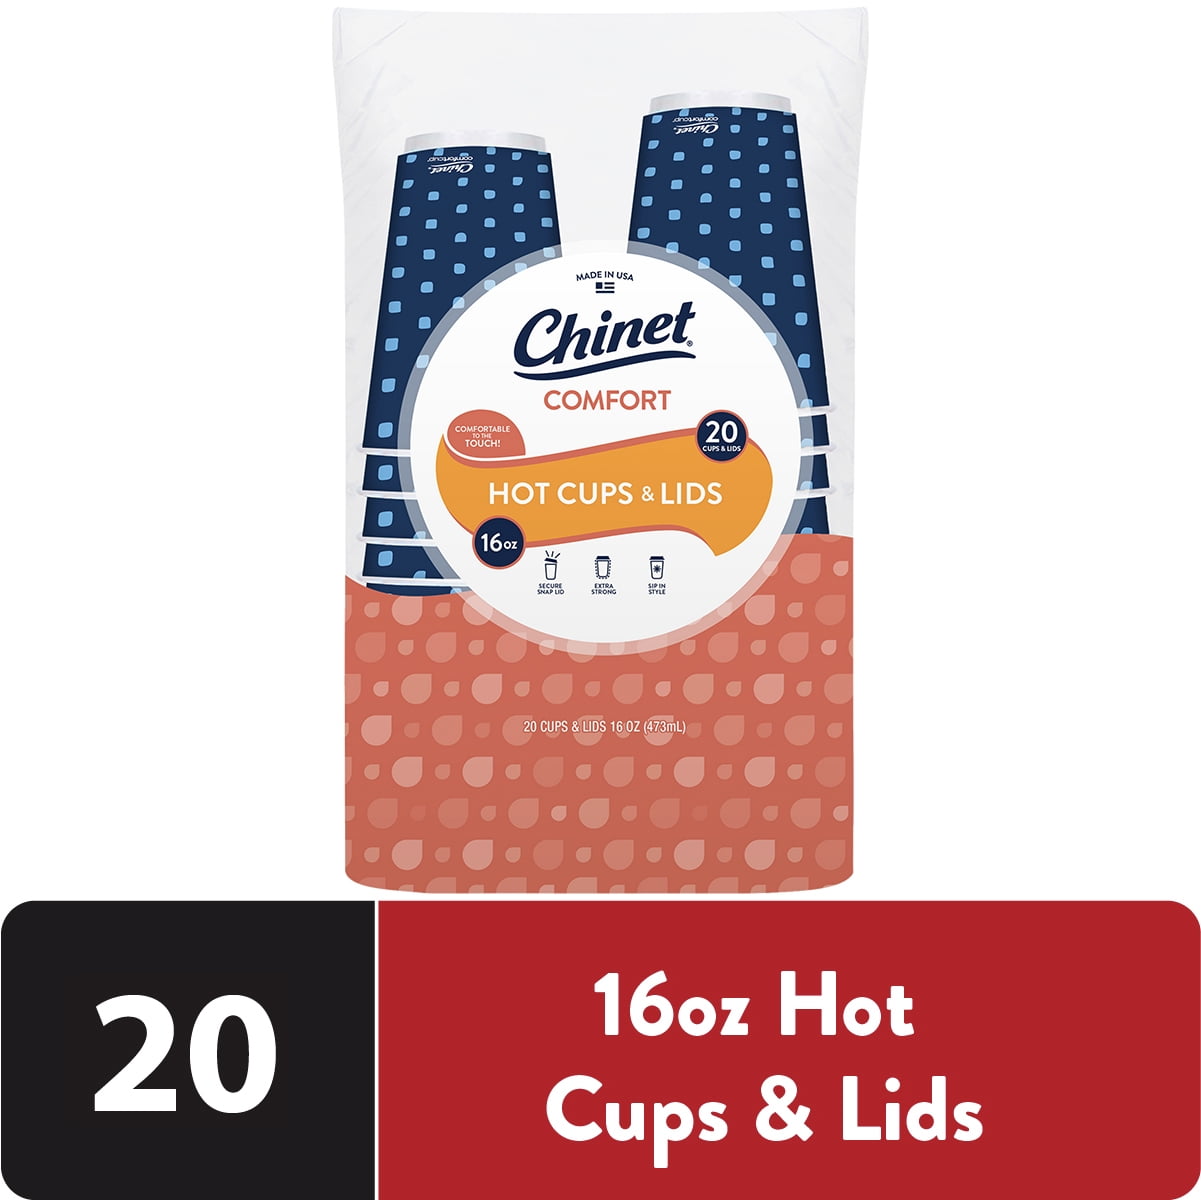 Chinet Comfort Premium Disposable Paper Hot Cups with Lids, 16 oz, 20 Count